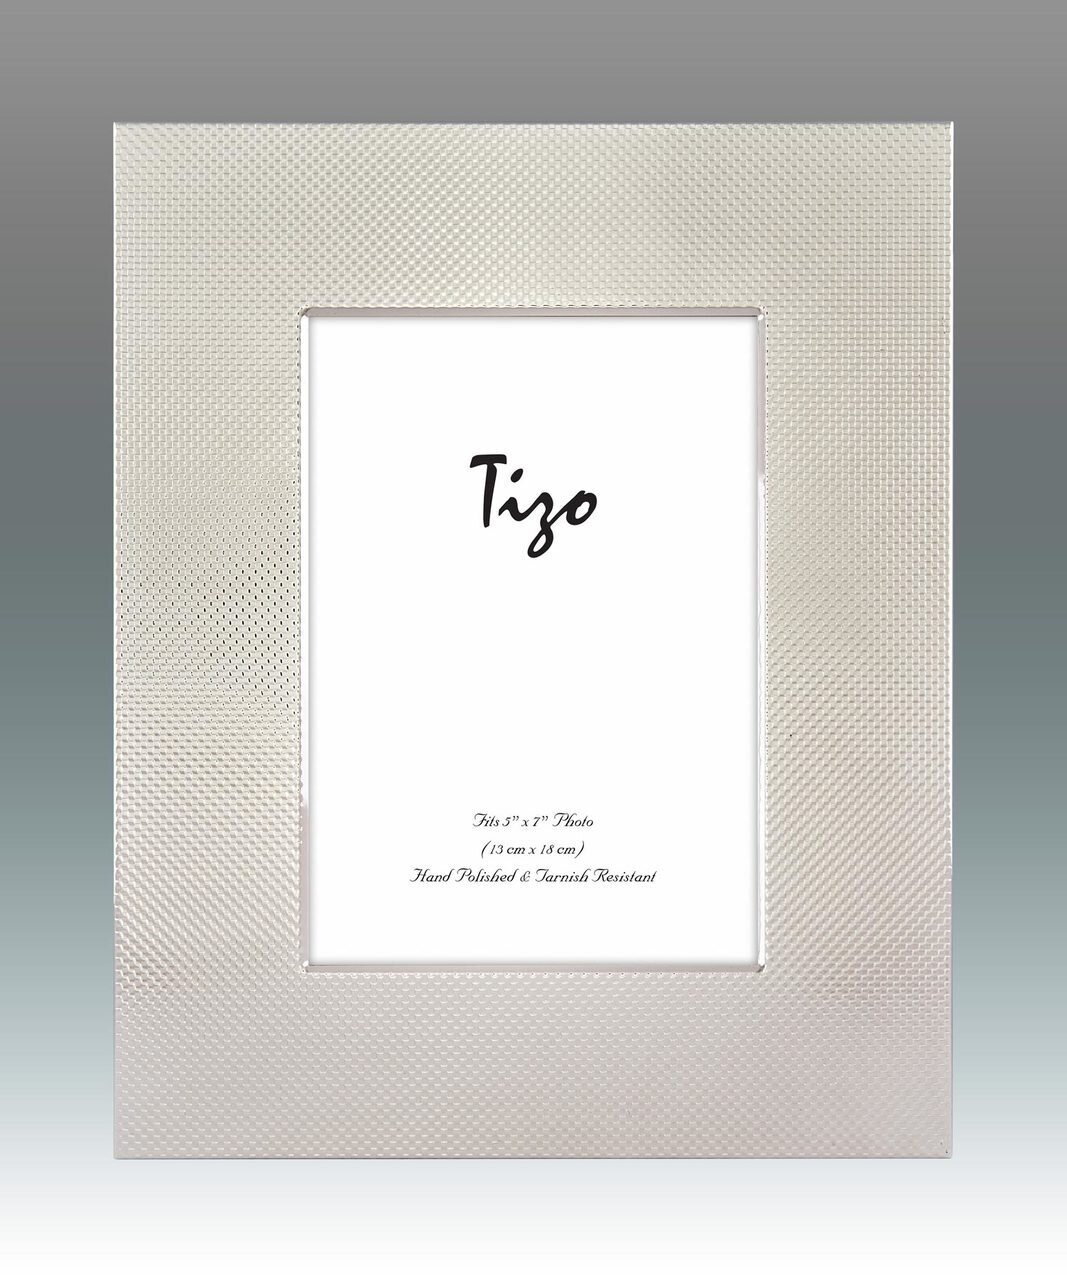 Tizo Empire of Dots Silver-plated Picture Frame 5 x 7 Inch